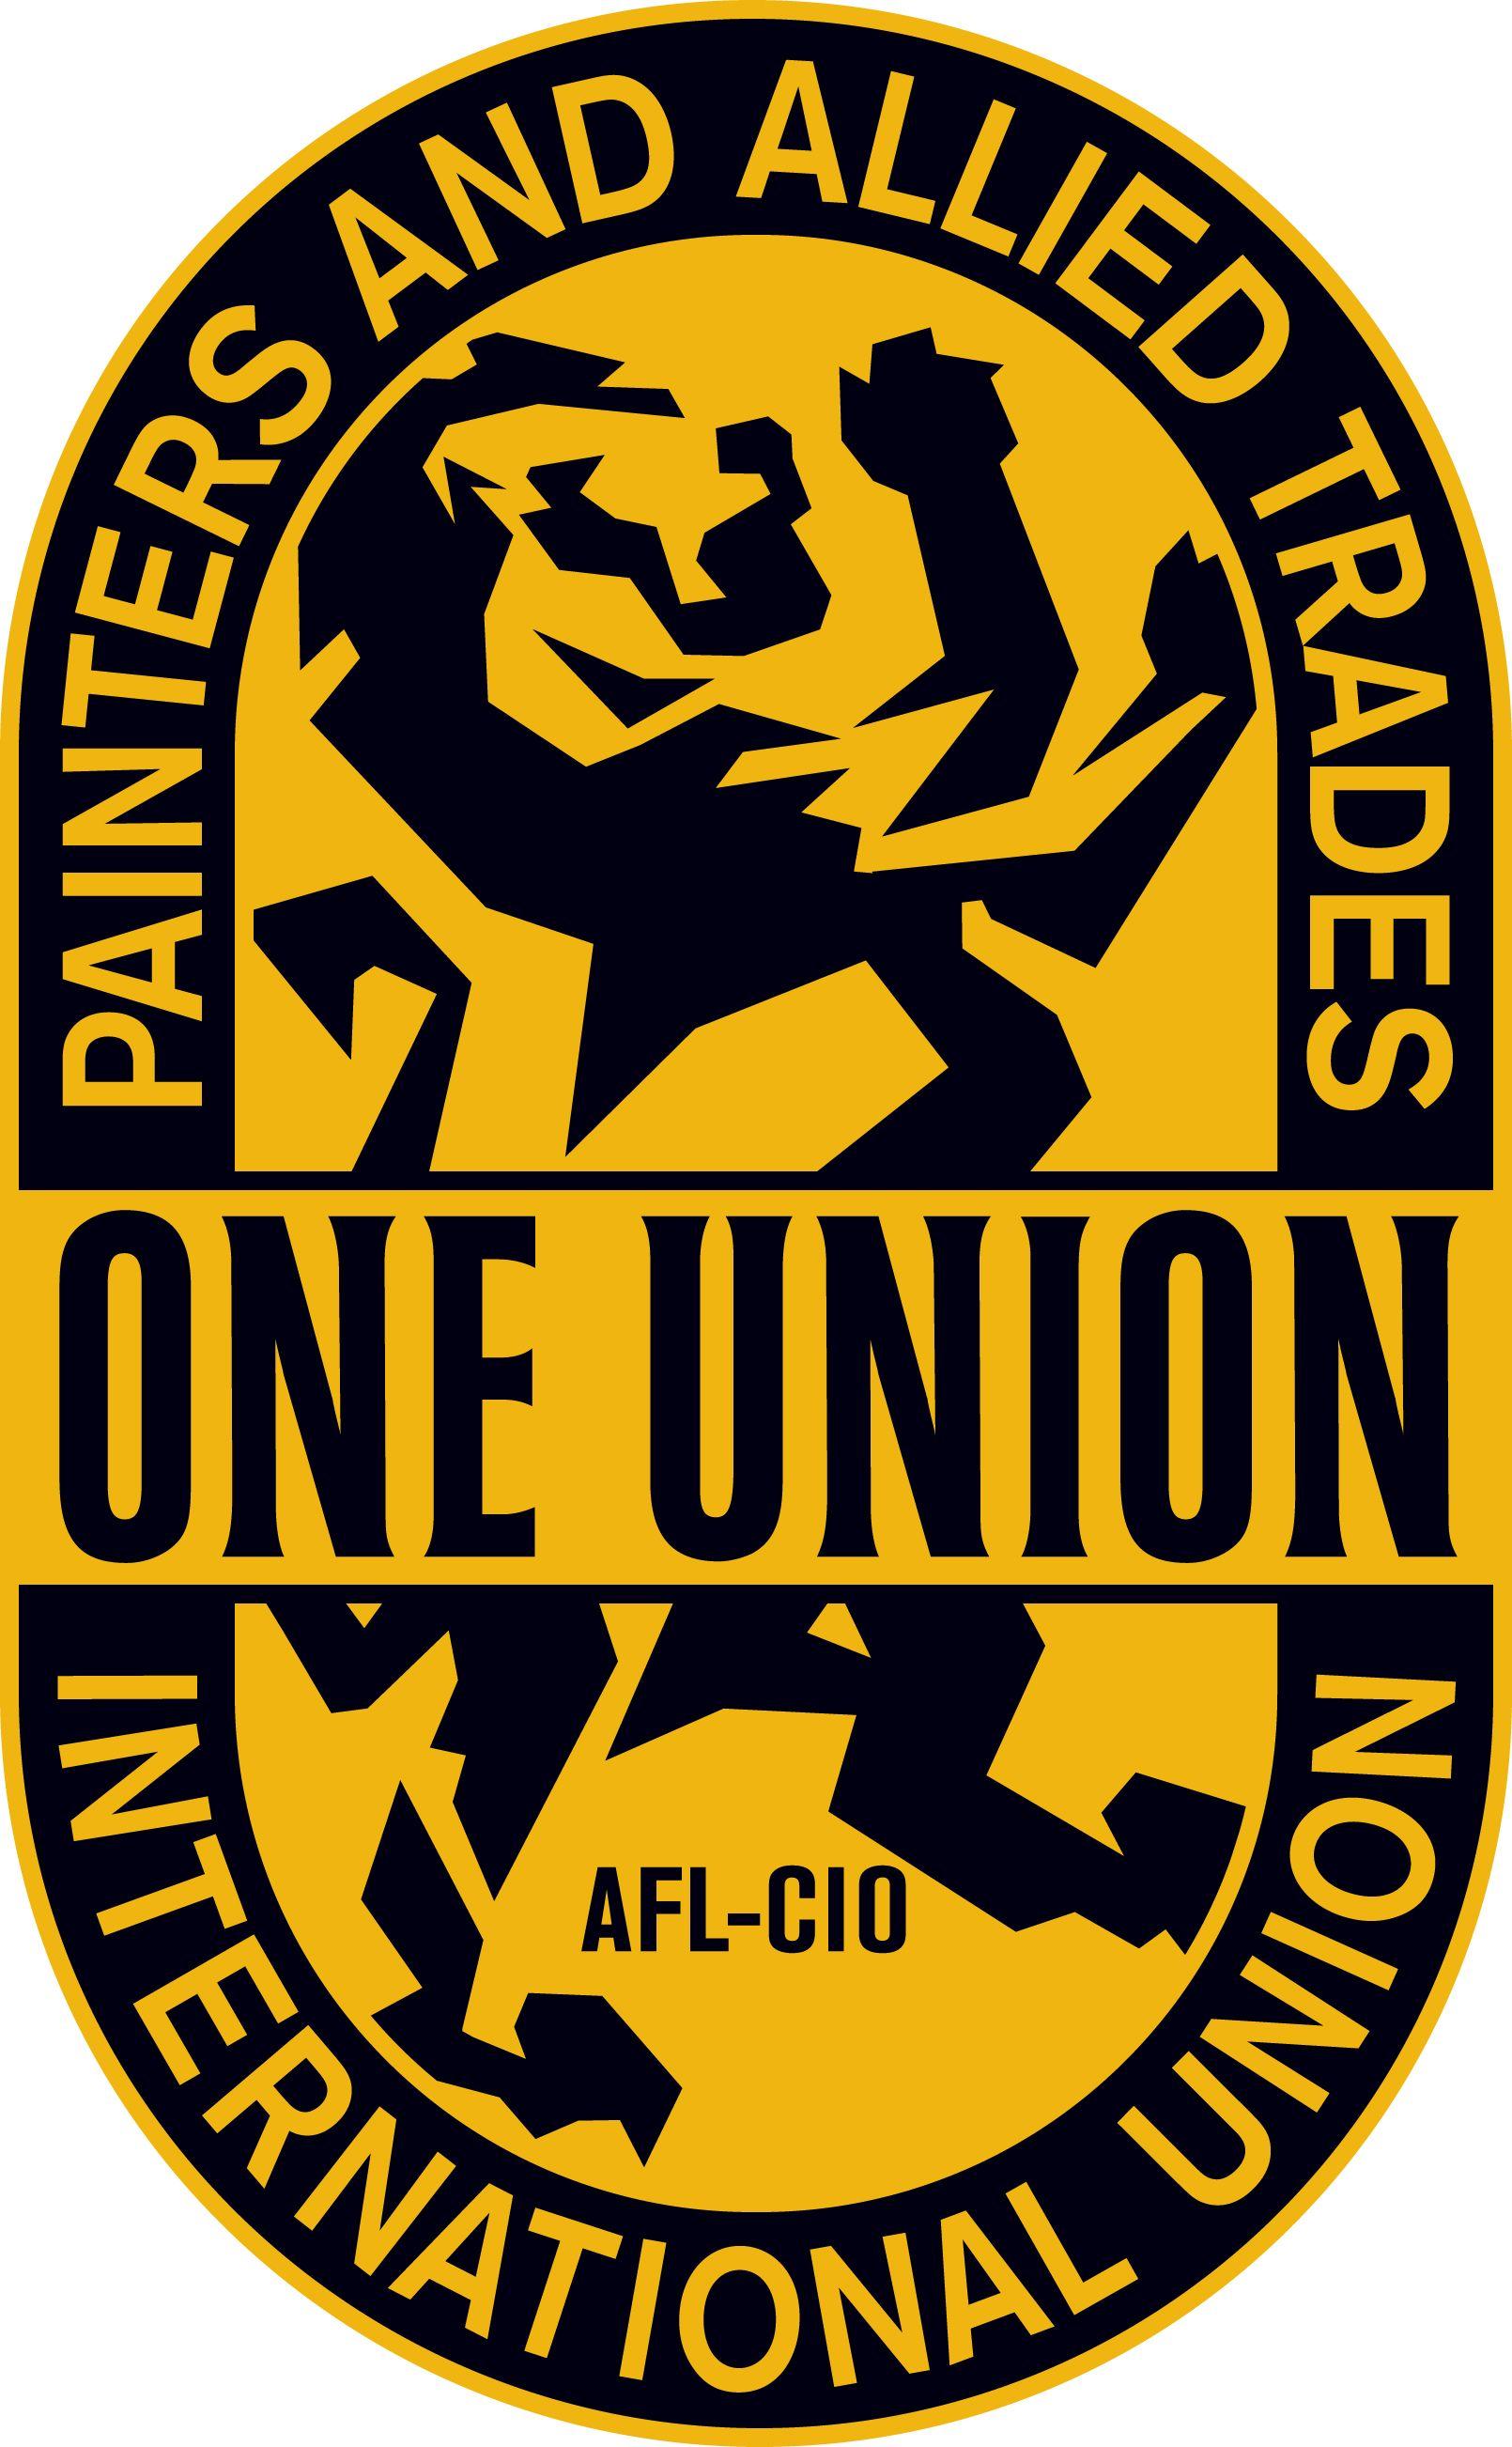 Union Logo - IUPAT - The International Union of Painters and Allied Trades